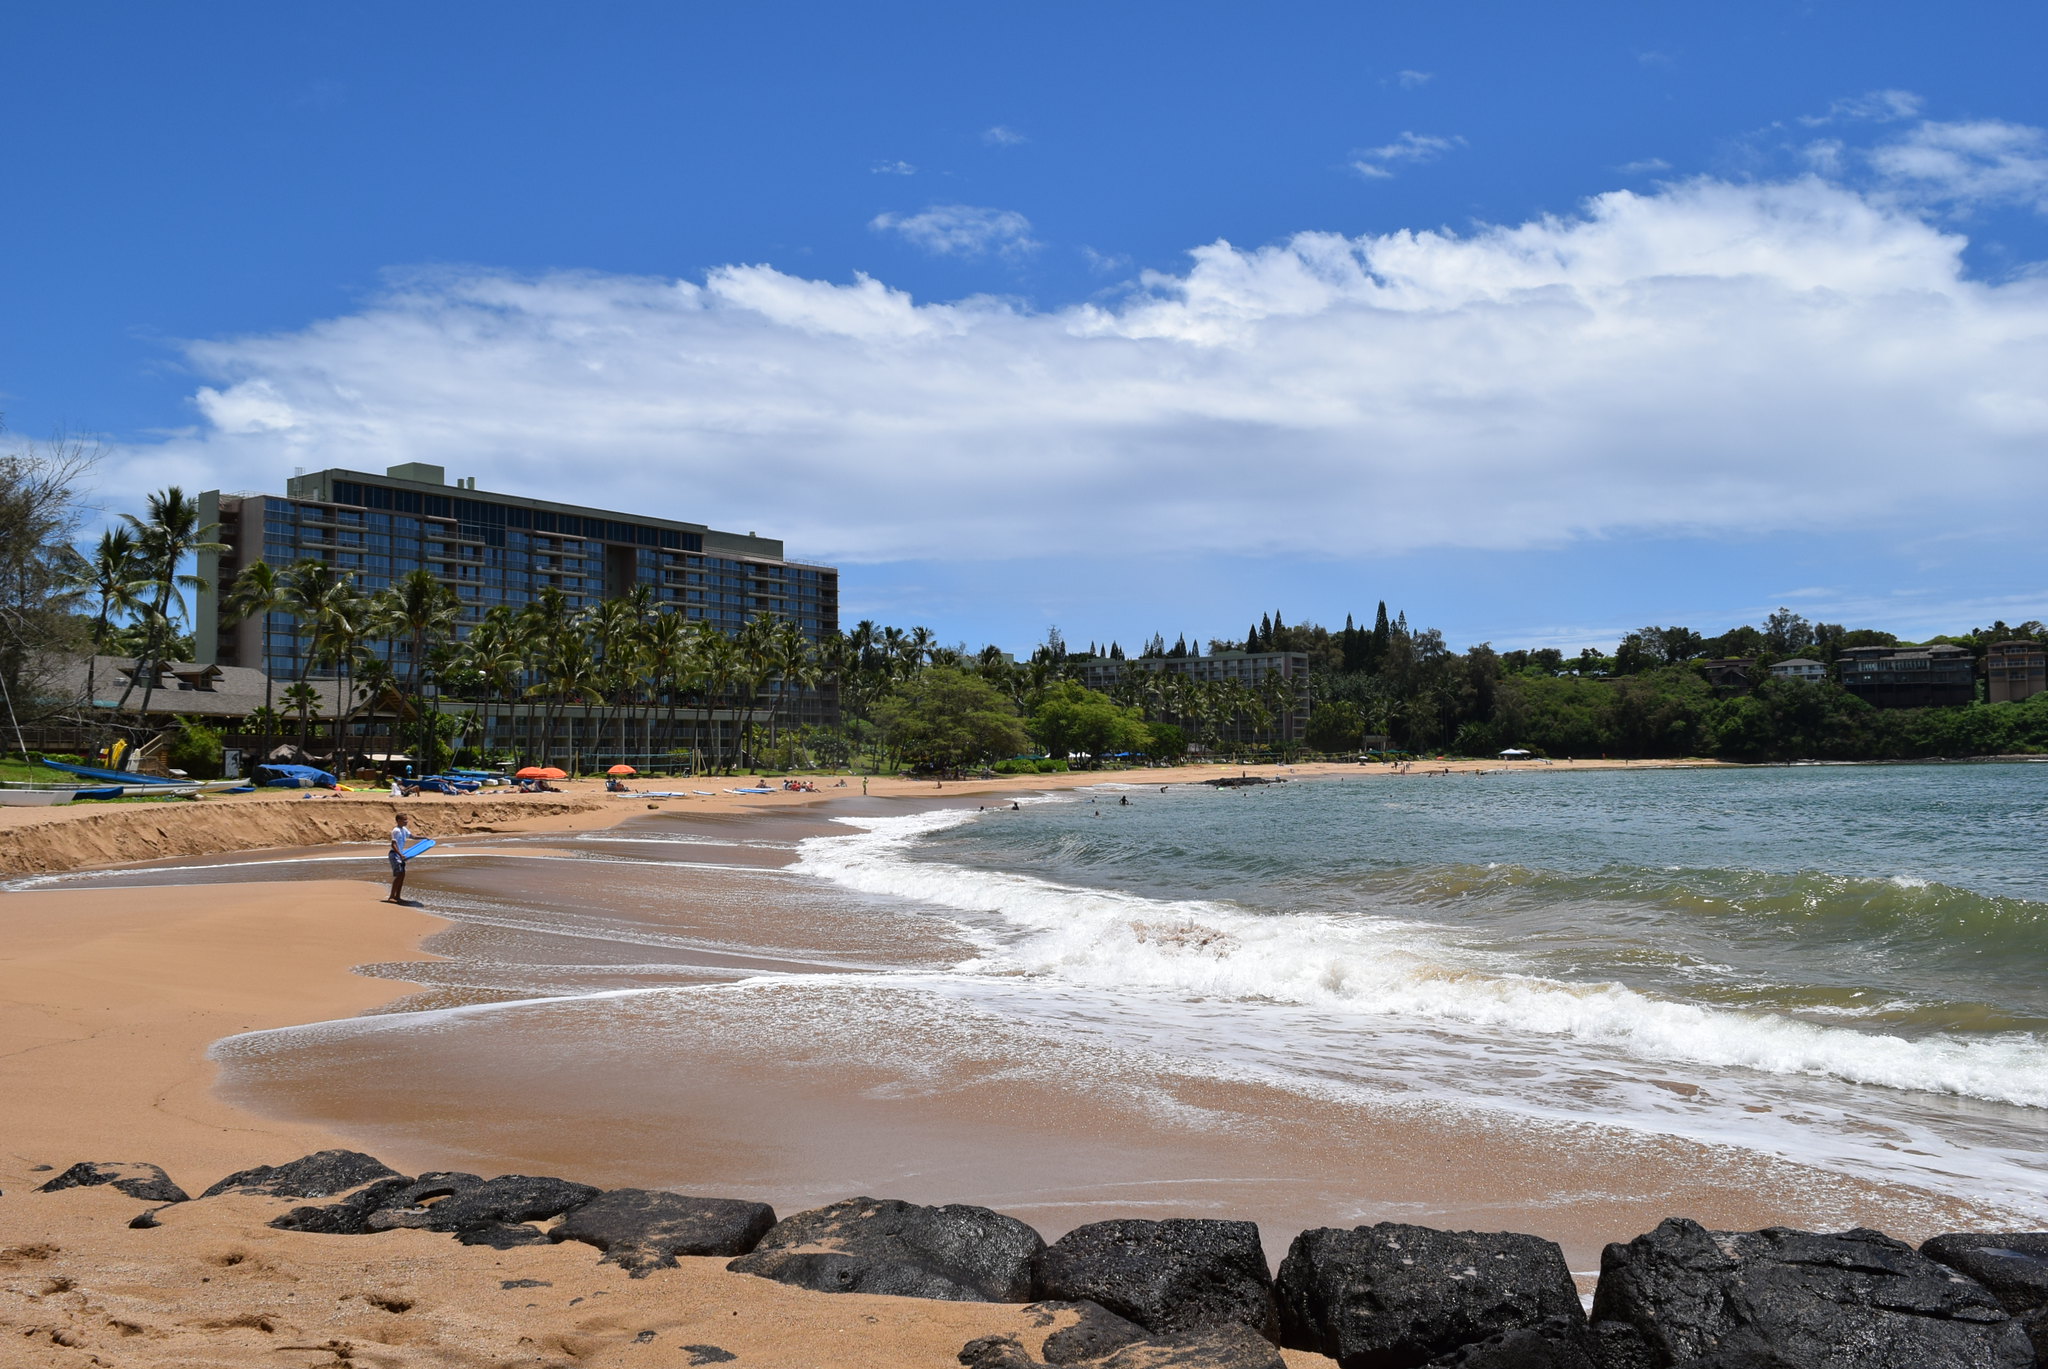 15 Things to do in Lihue, Hawaii